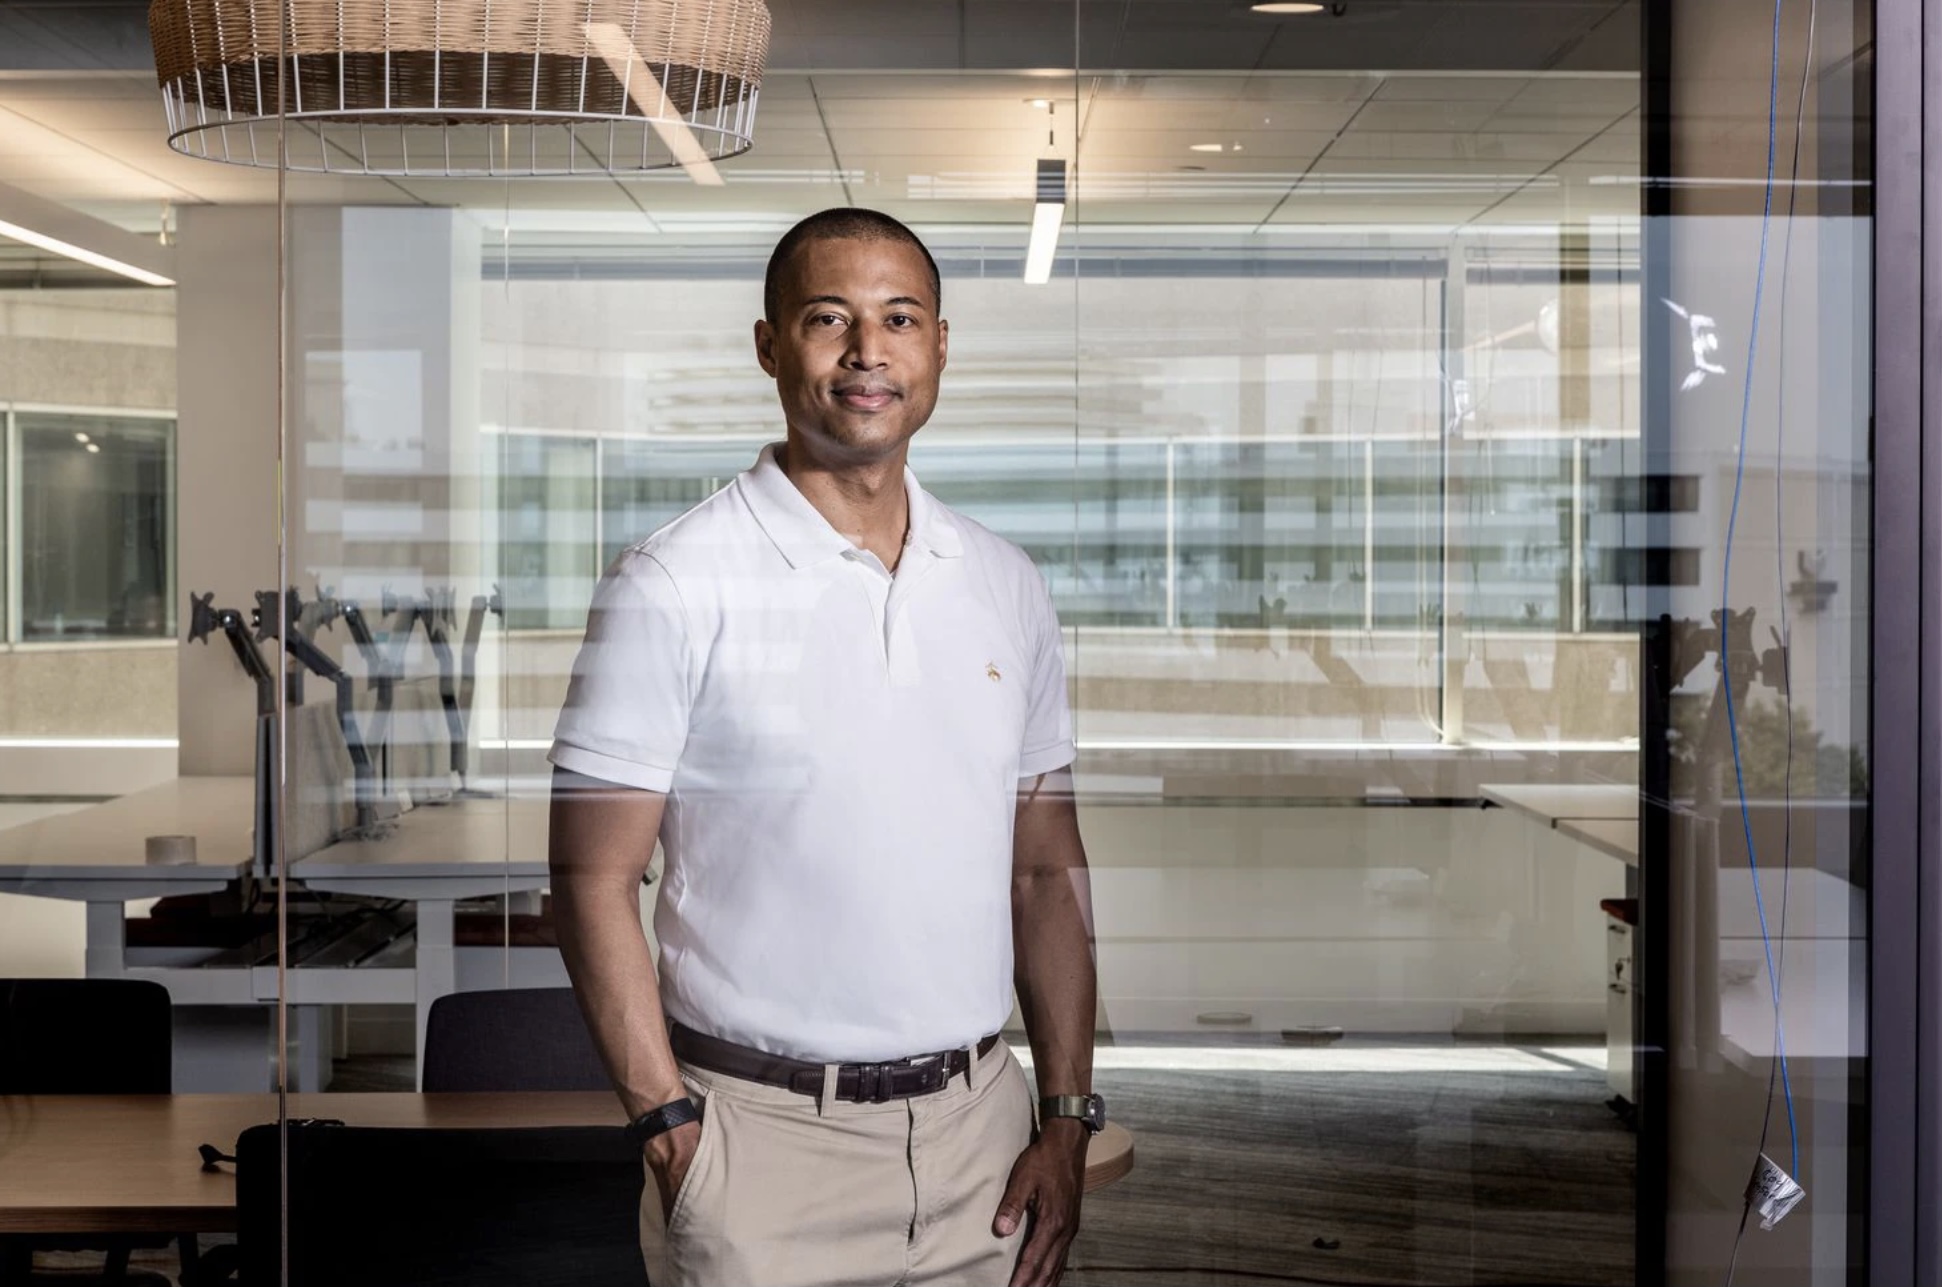 Alix Guerrier, CEO of °ϲ, stands in the nonprofits new headquarters after months of working from home